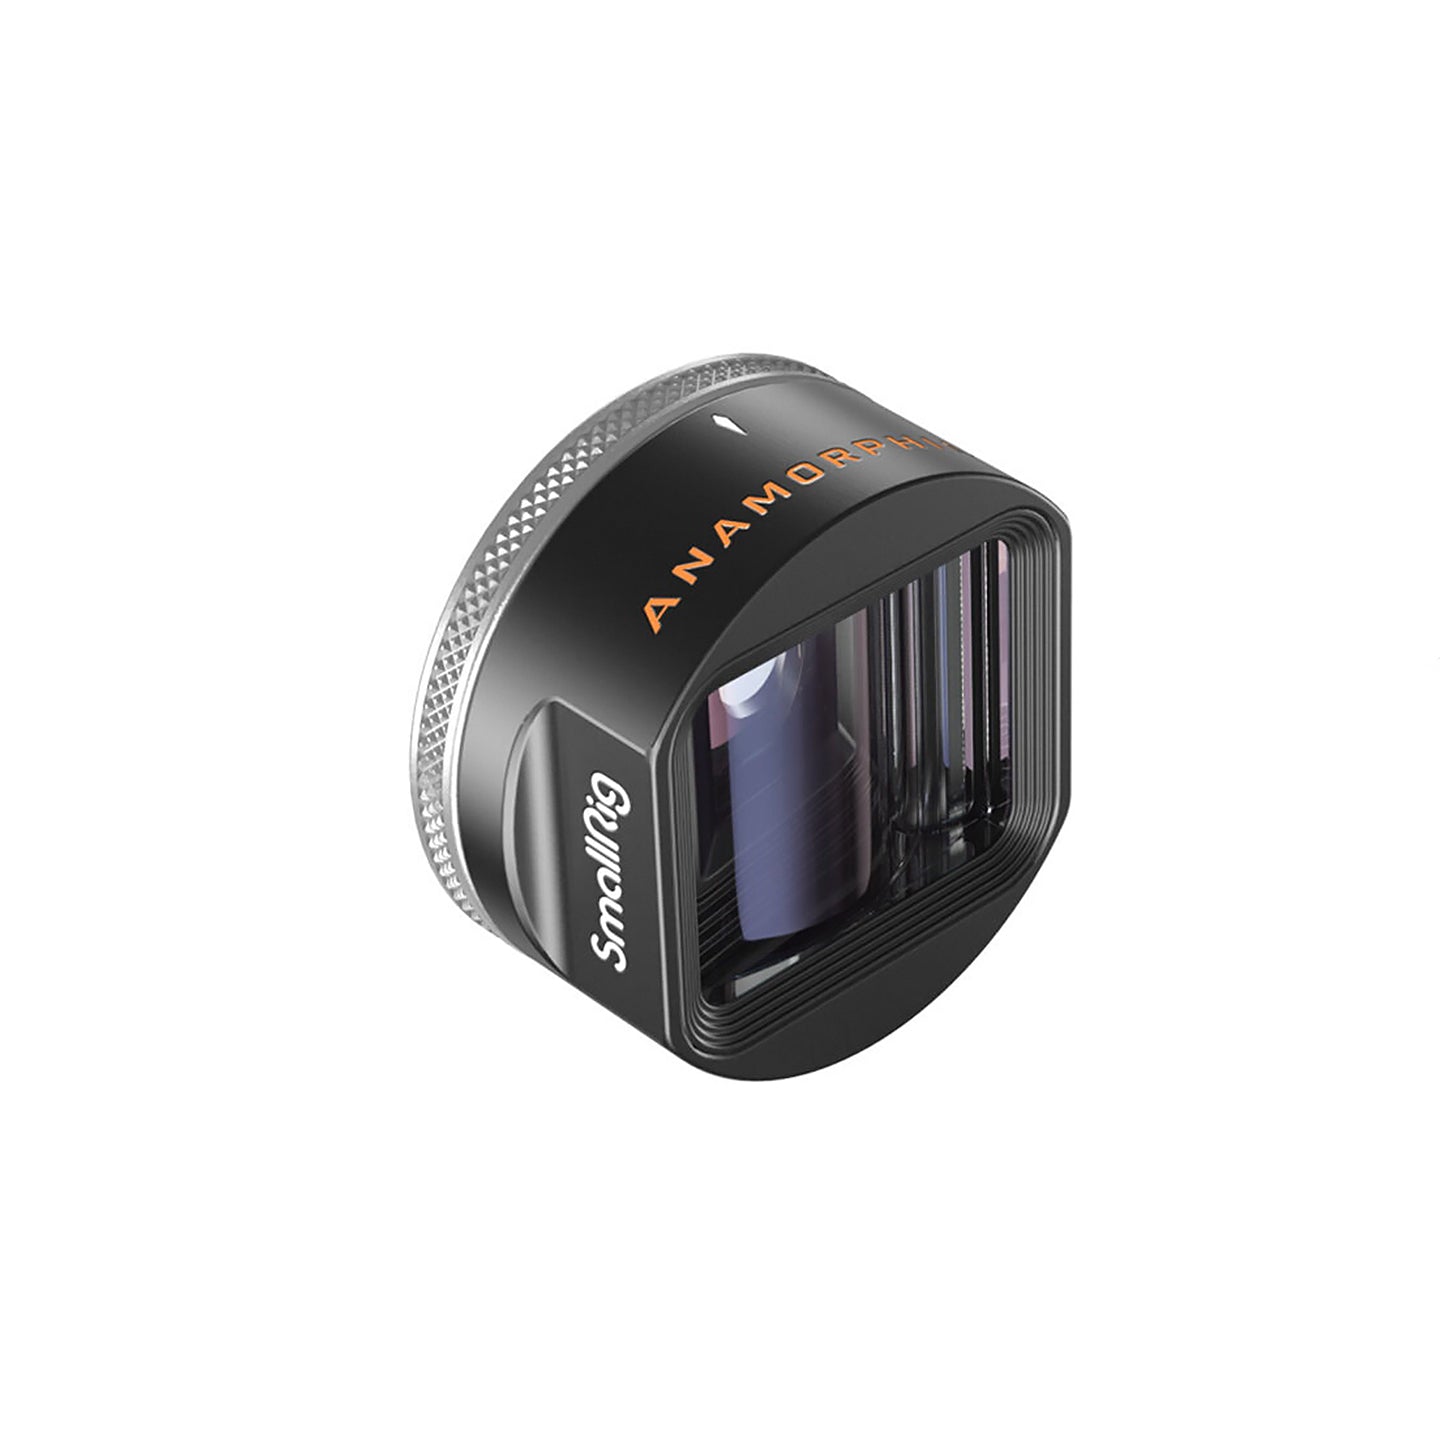 SmallRig Anamorphic 1.55X Wide Lens Clip for Smartphones & Tablets with Flare Effects, Widescreen Ratio, Rotation Alignment | 3578